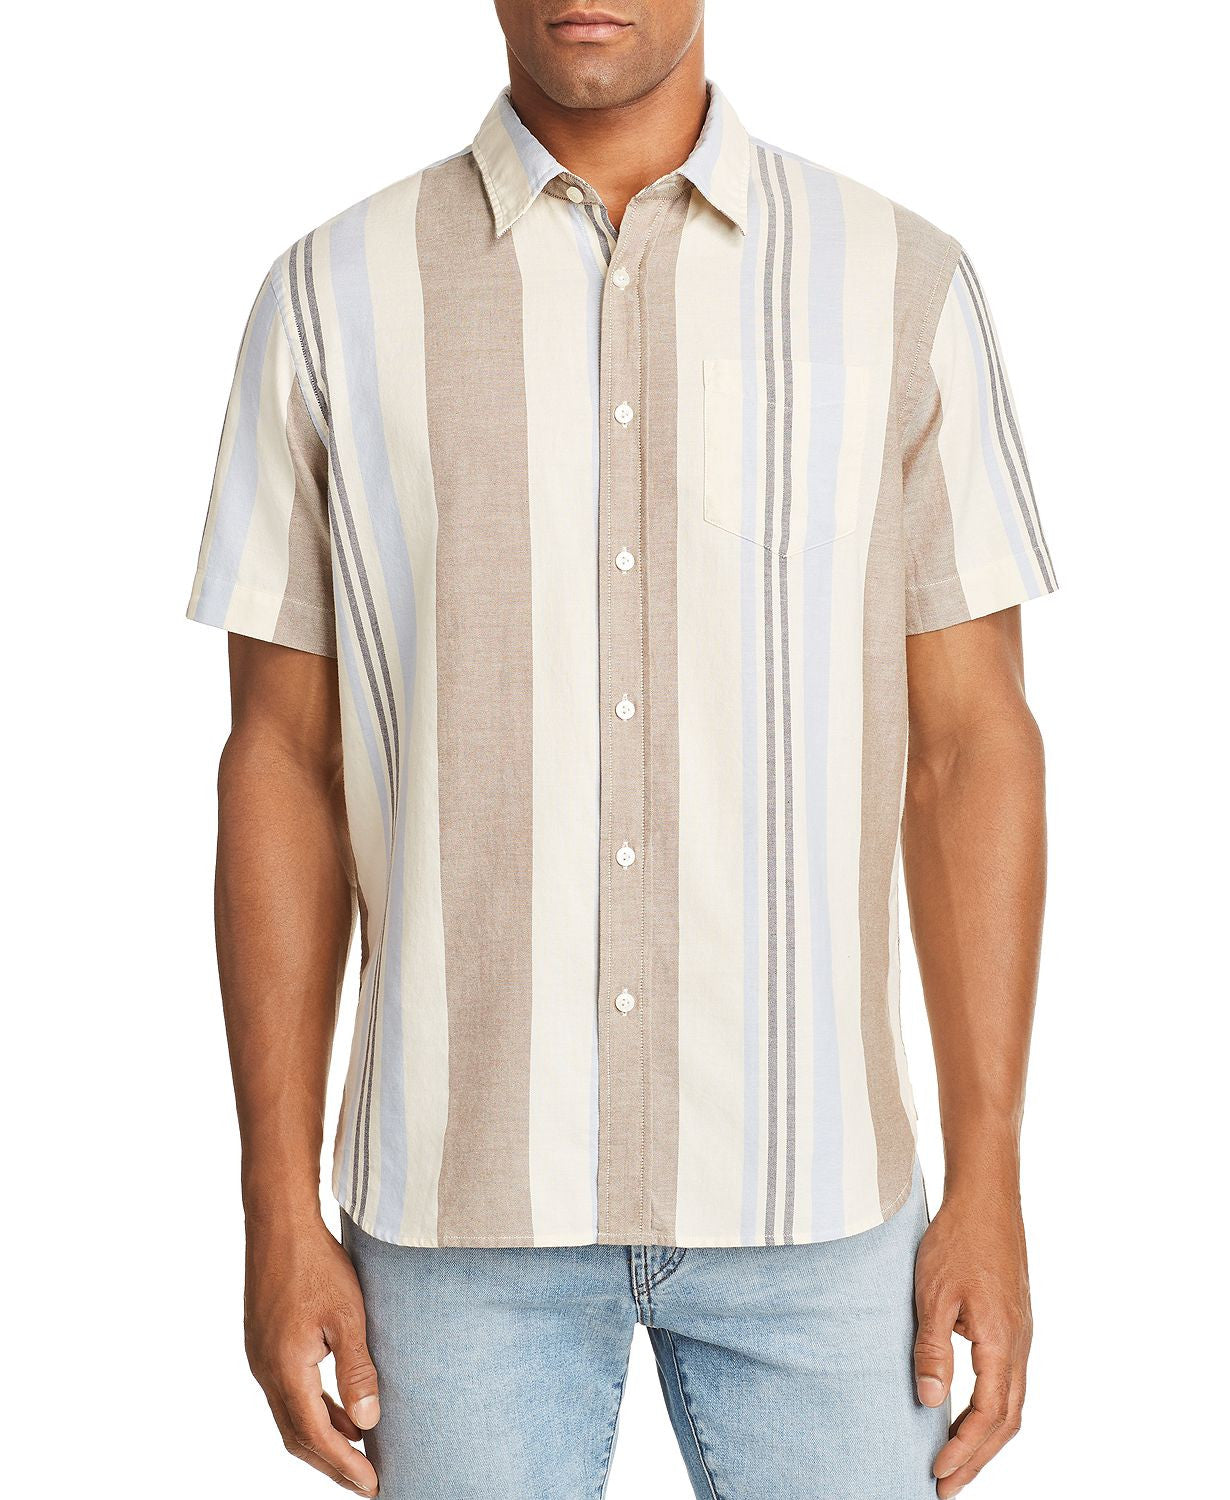 Jachs Ny Variegated-stripe Regular Fit Button-down Shirt Cream/blue/taupe